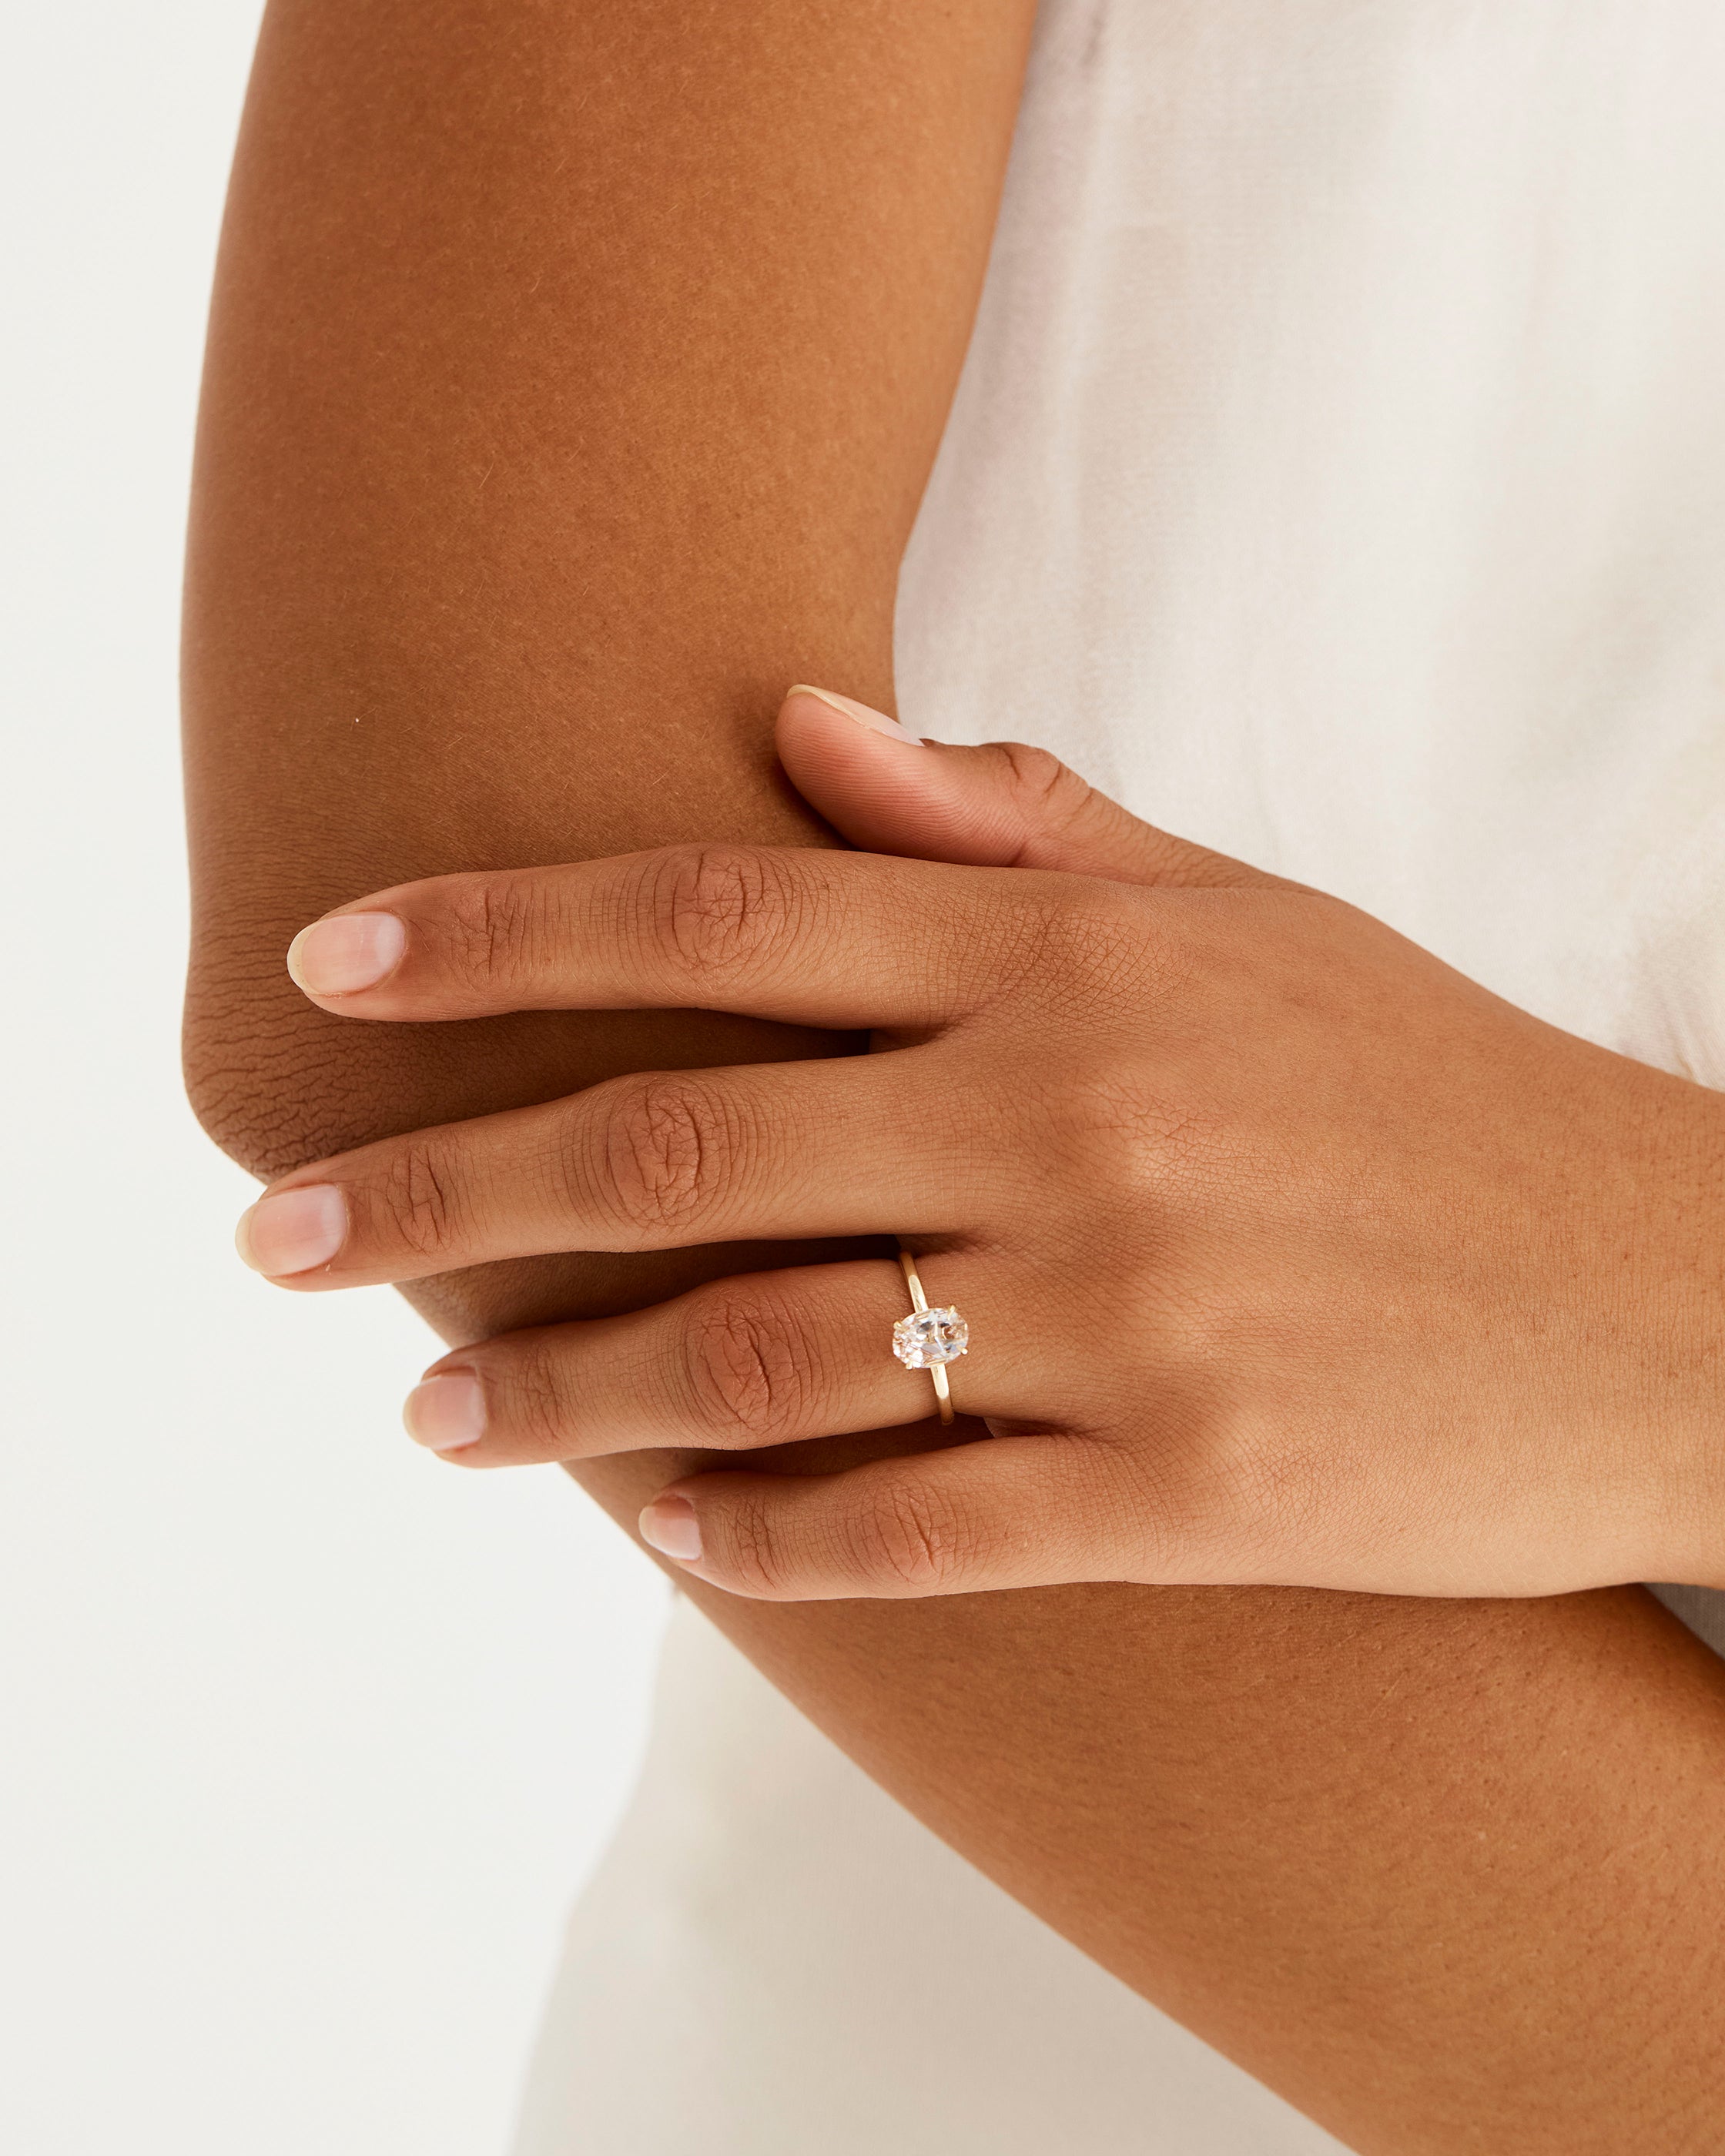 A model wears an oval solitaire style engagement ring with a rutilated quartz